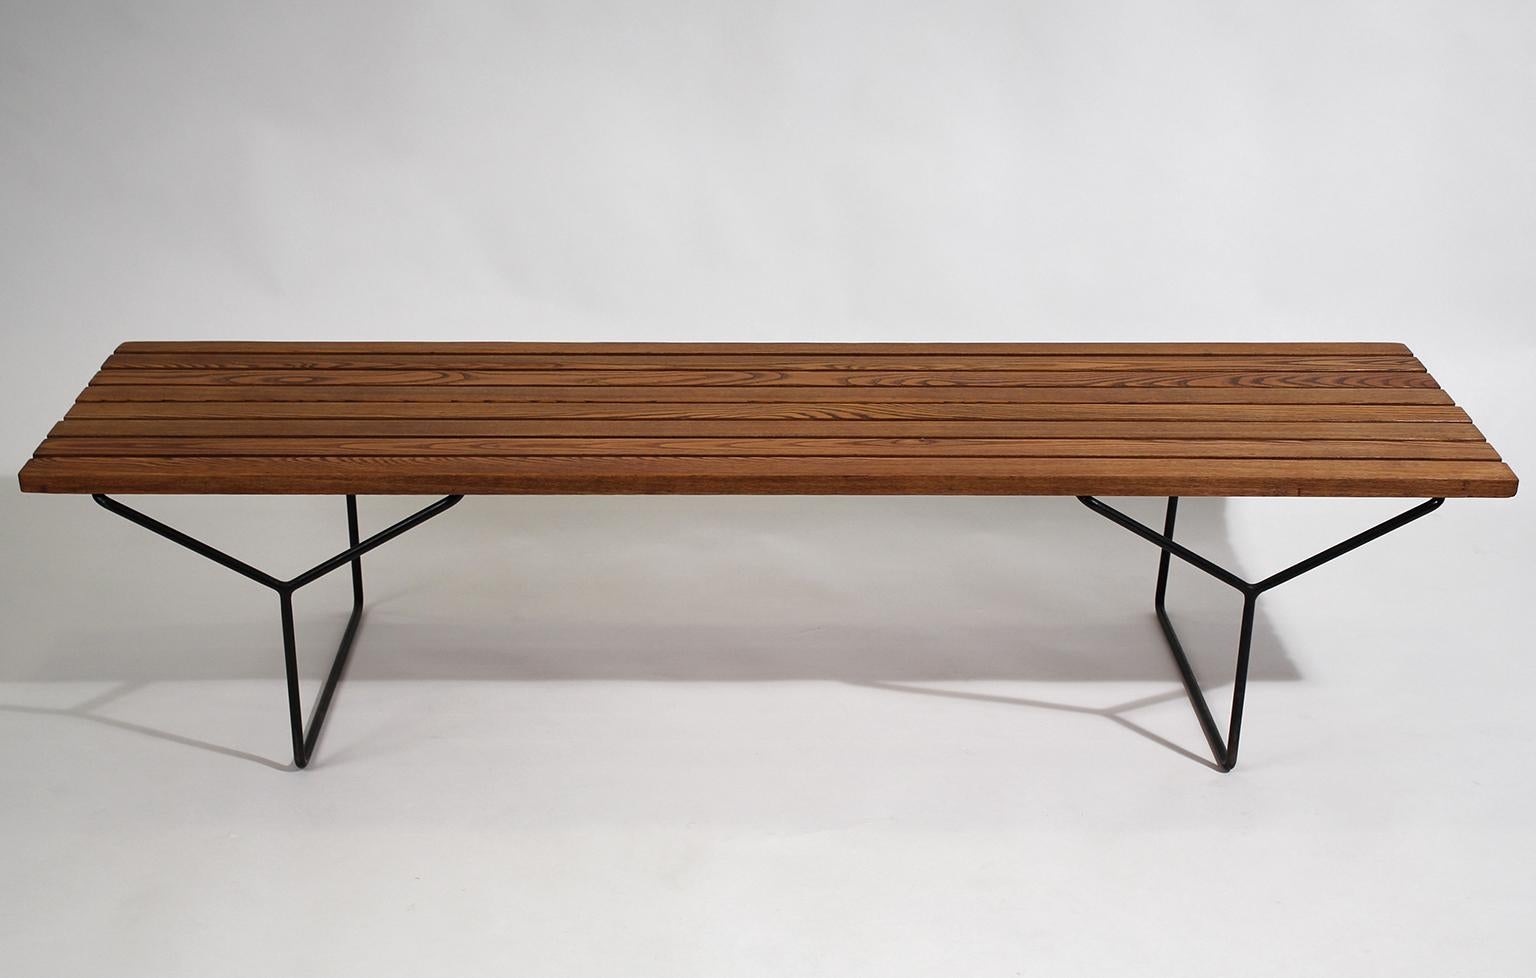 Early Harry Bertoia designed wood slat bench for Knoll International, circa 1960. Awesome form and design. Has wrought iron legs and the wood has wonderful color. In excellent original vintage condition. Tough to find early bench.